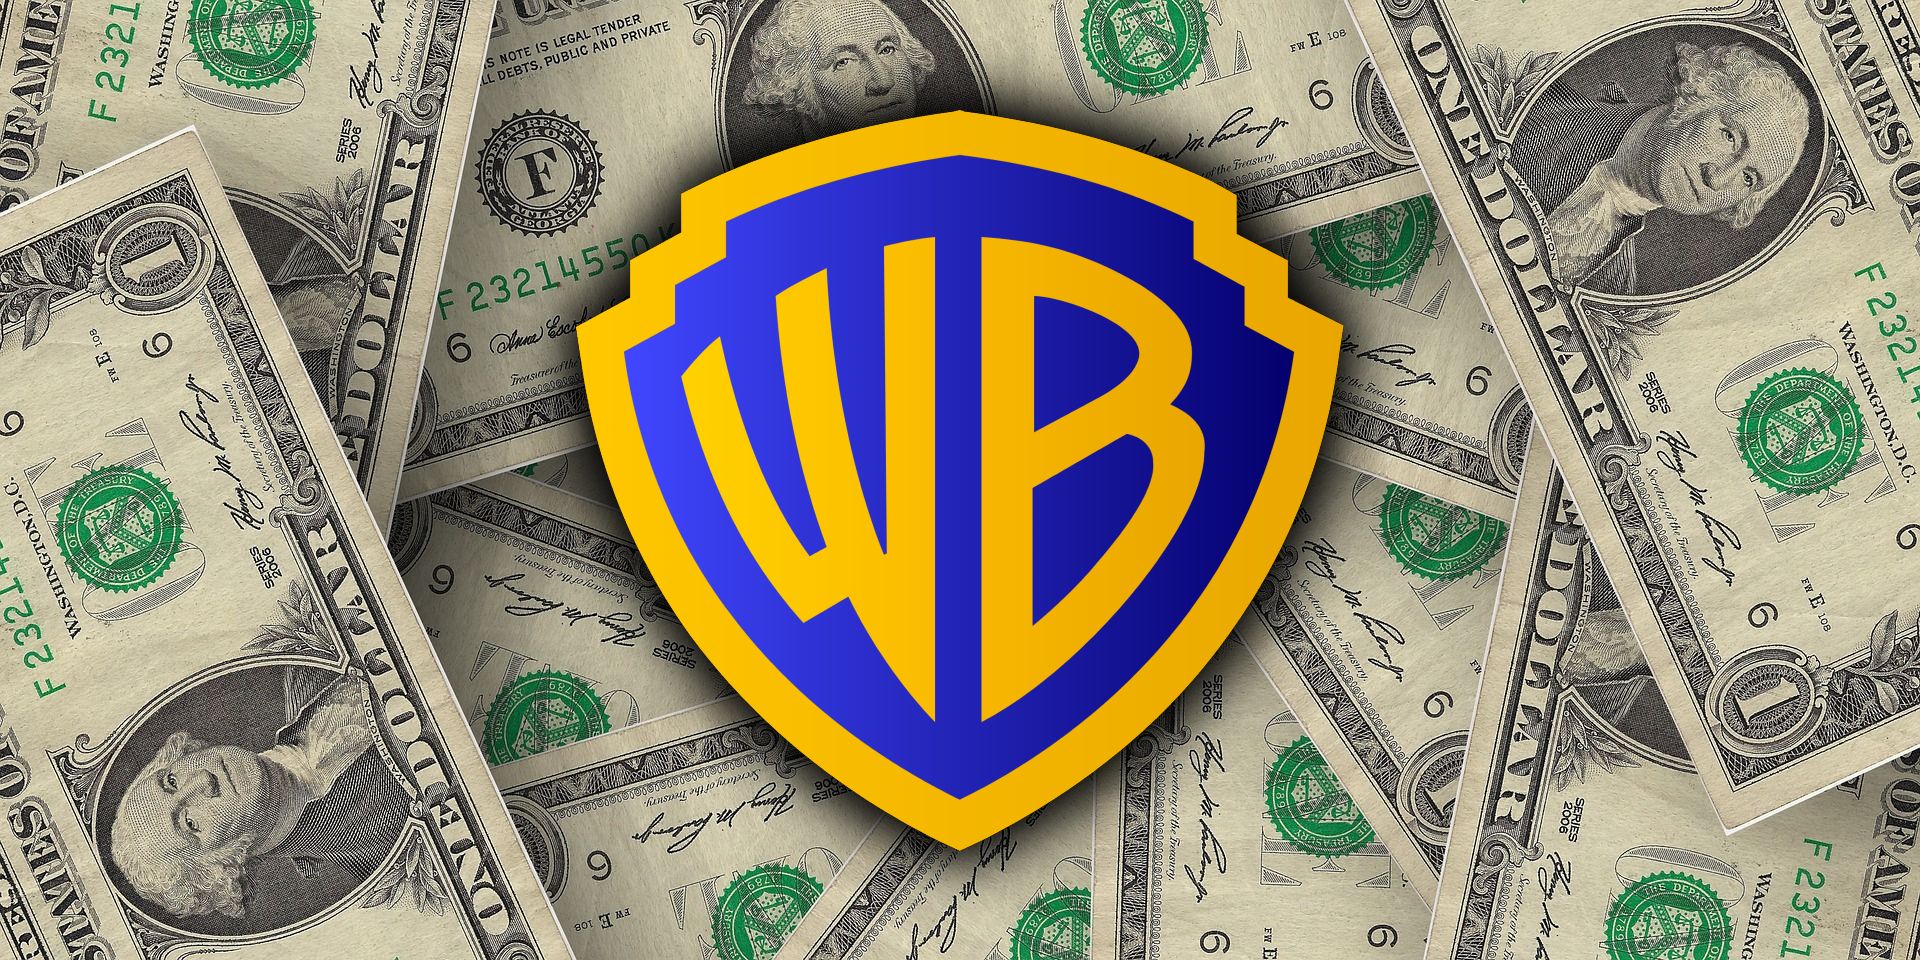 What The Warner Bros. Discovery Merger Has Meant For Moviegoers